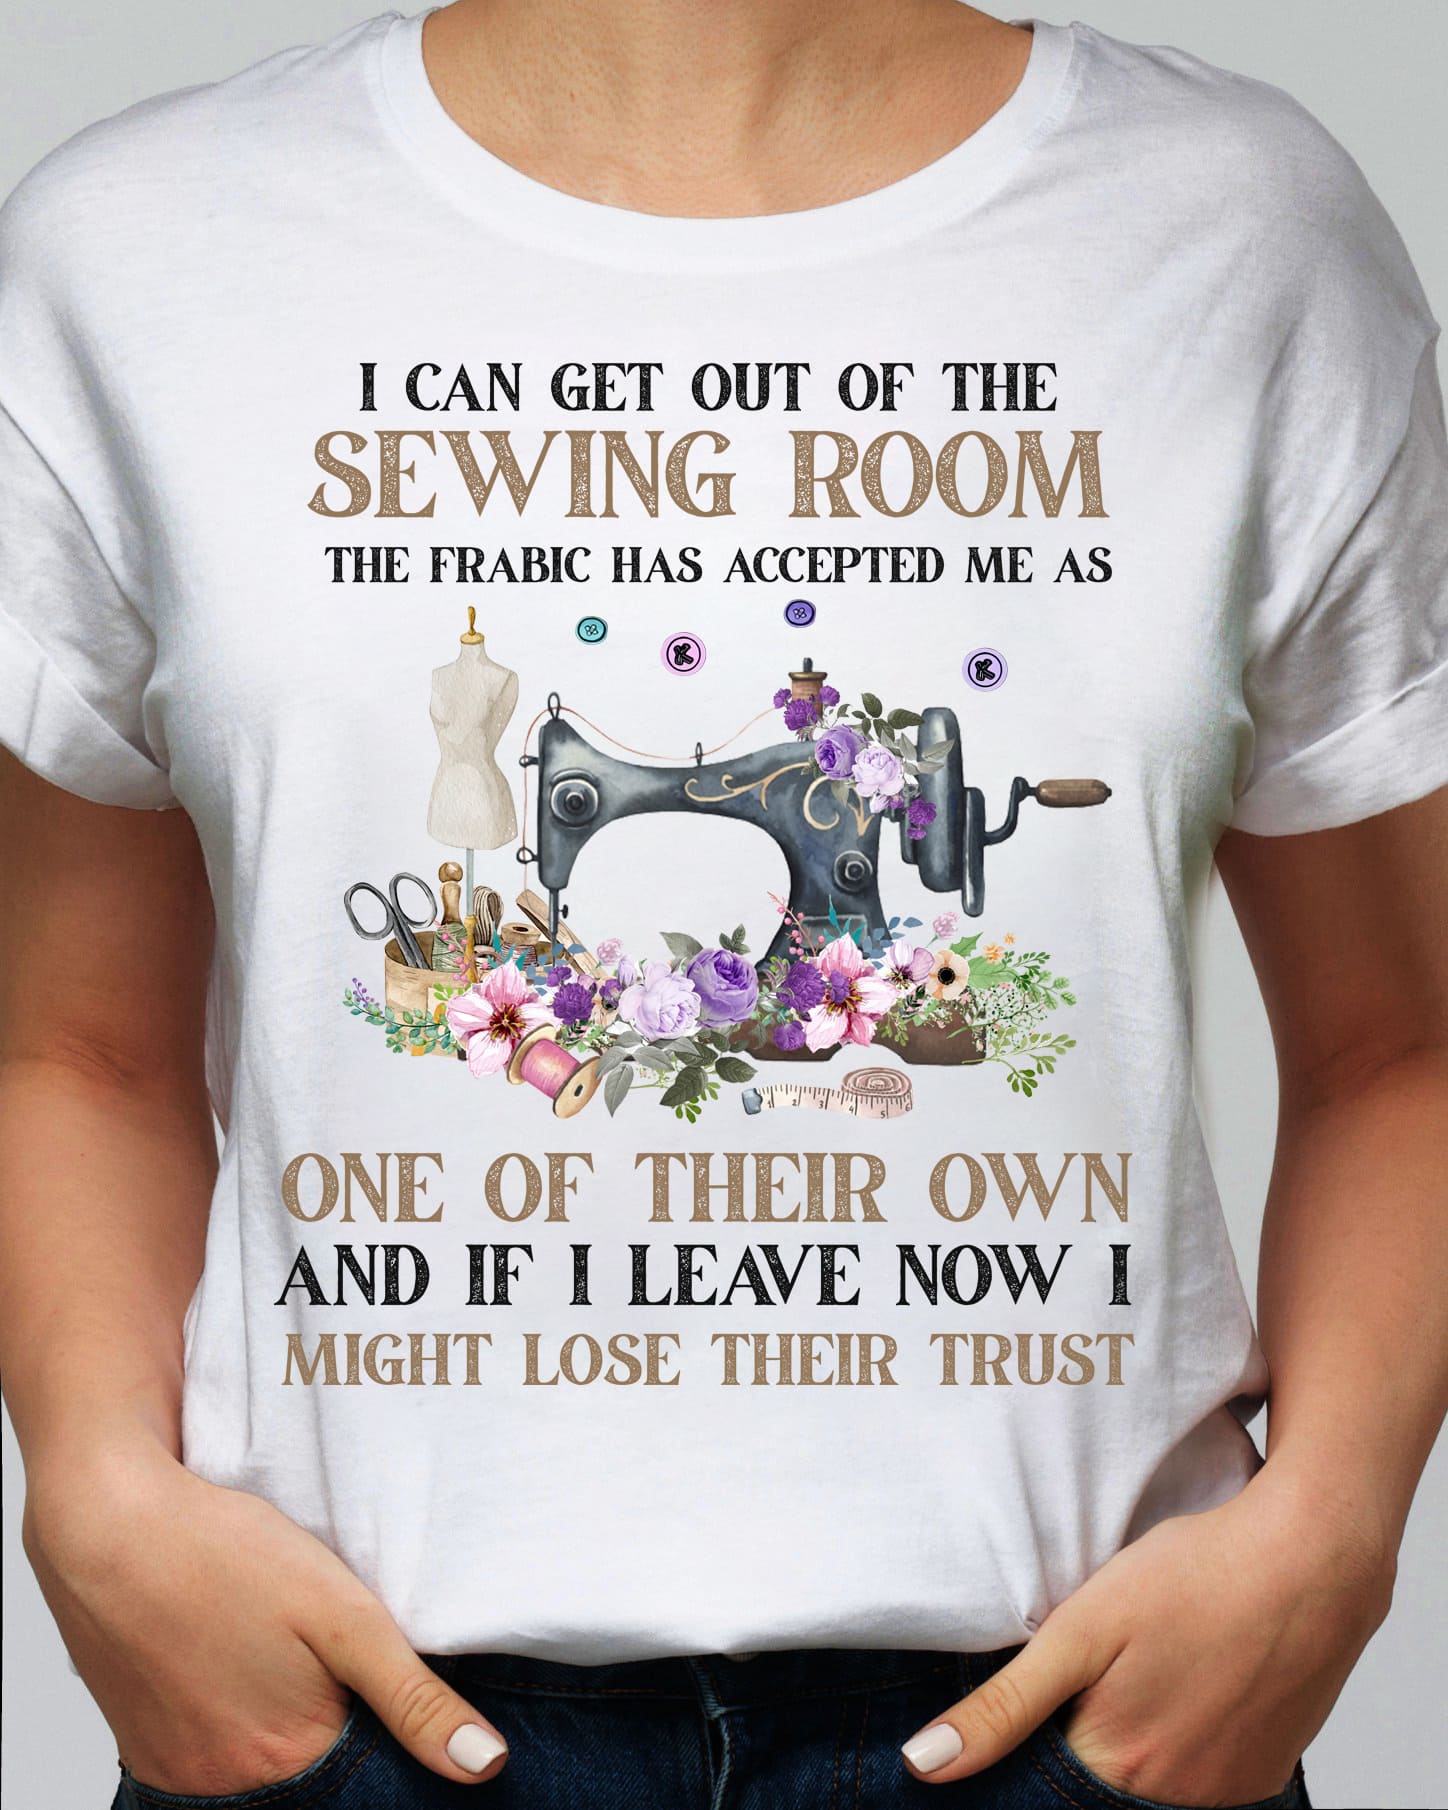 I can get out of the sewing room the fabric has accept me - Sewing machine graphic T-shirt, sewing harmless hobby